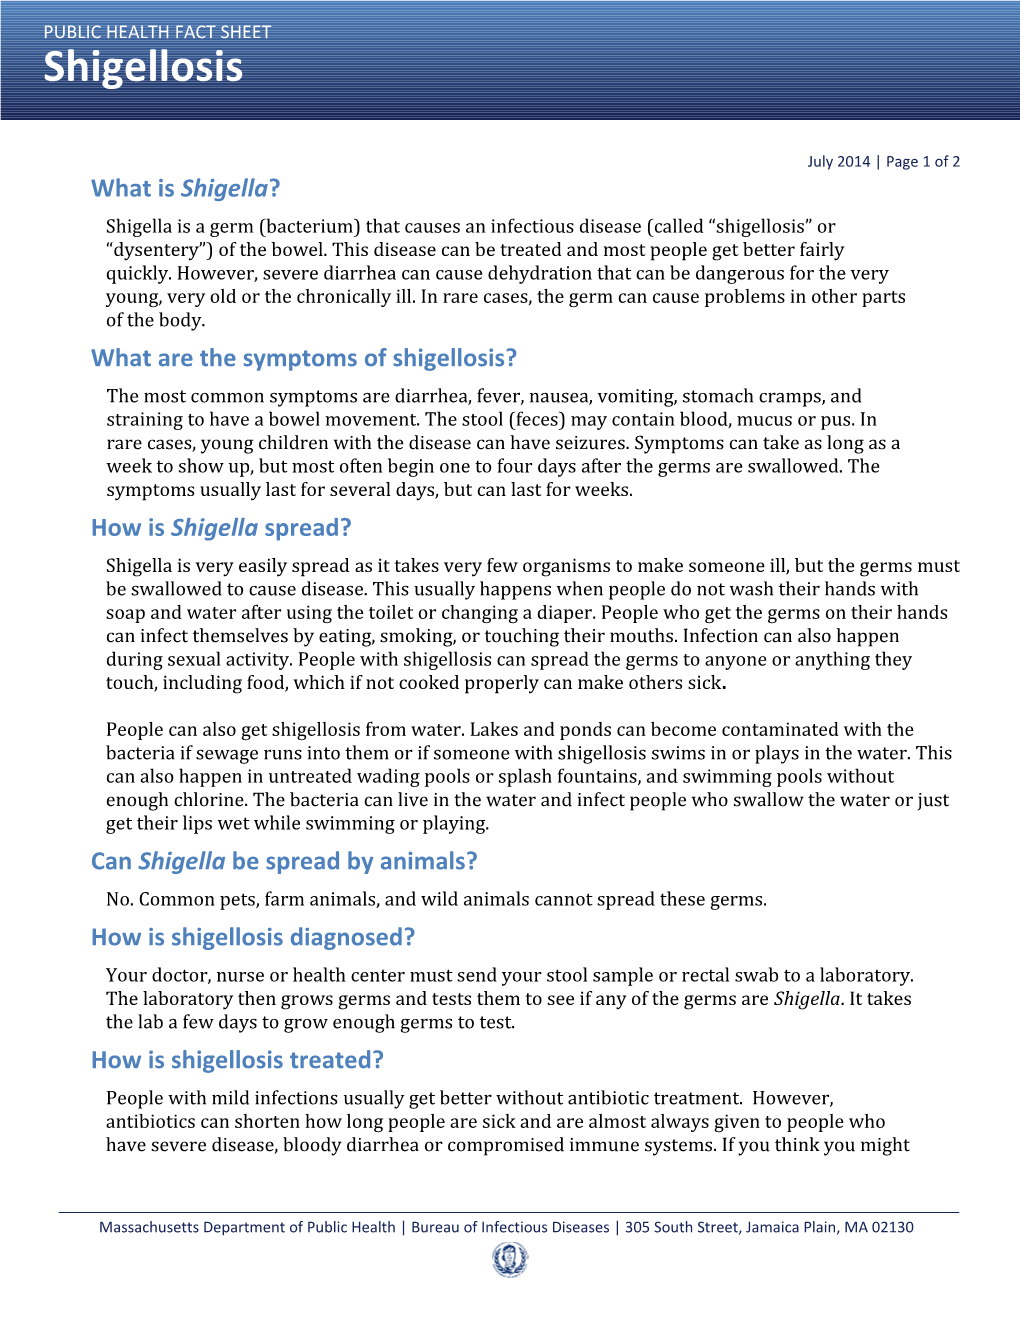 What Are the Symptoms of Shigellosis?